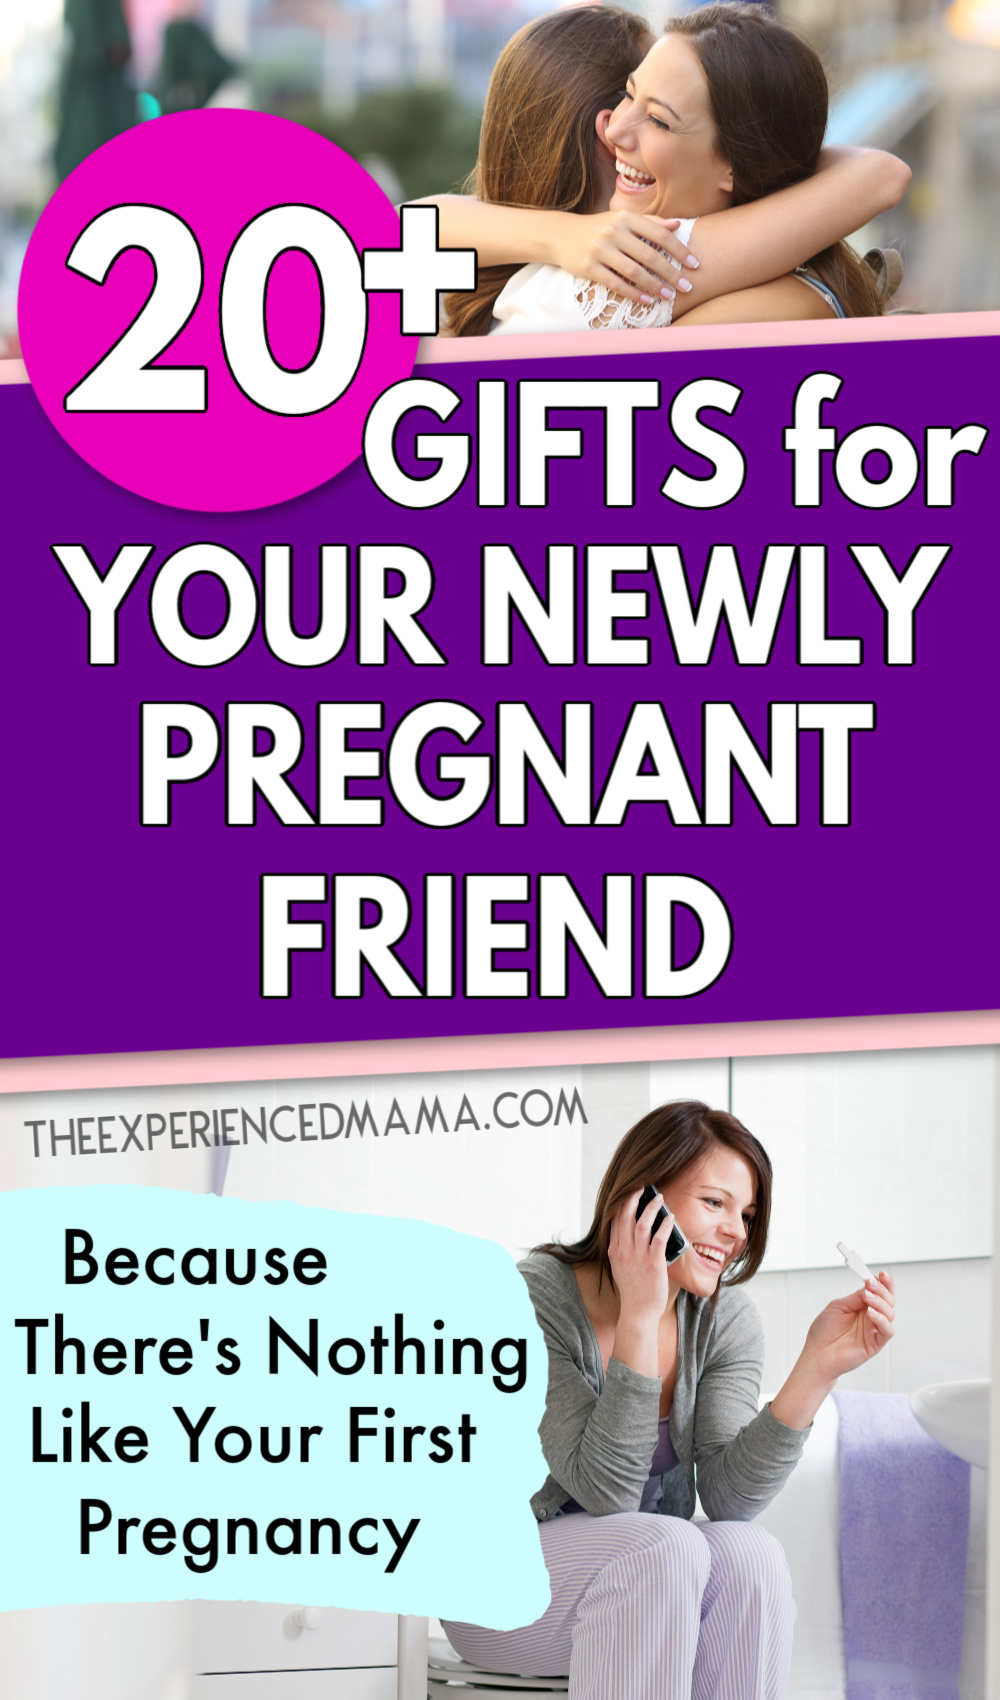 friends hugging after one friend gives newly pregnant friend a gift, woman sharing good news of pregnancy with friend